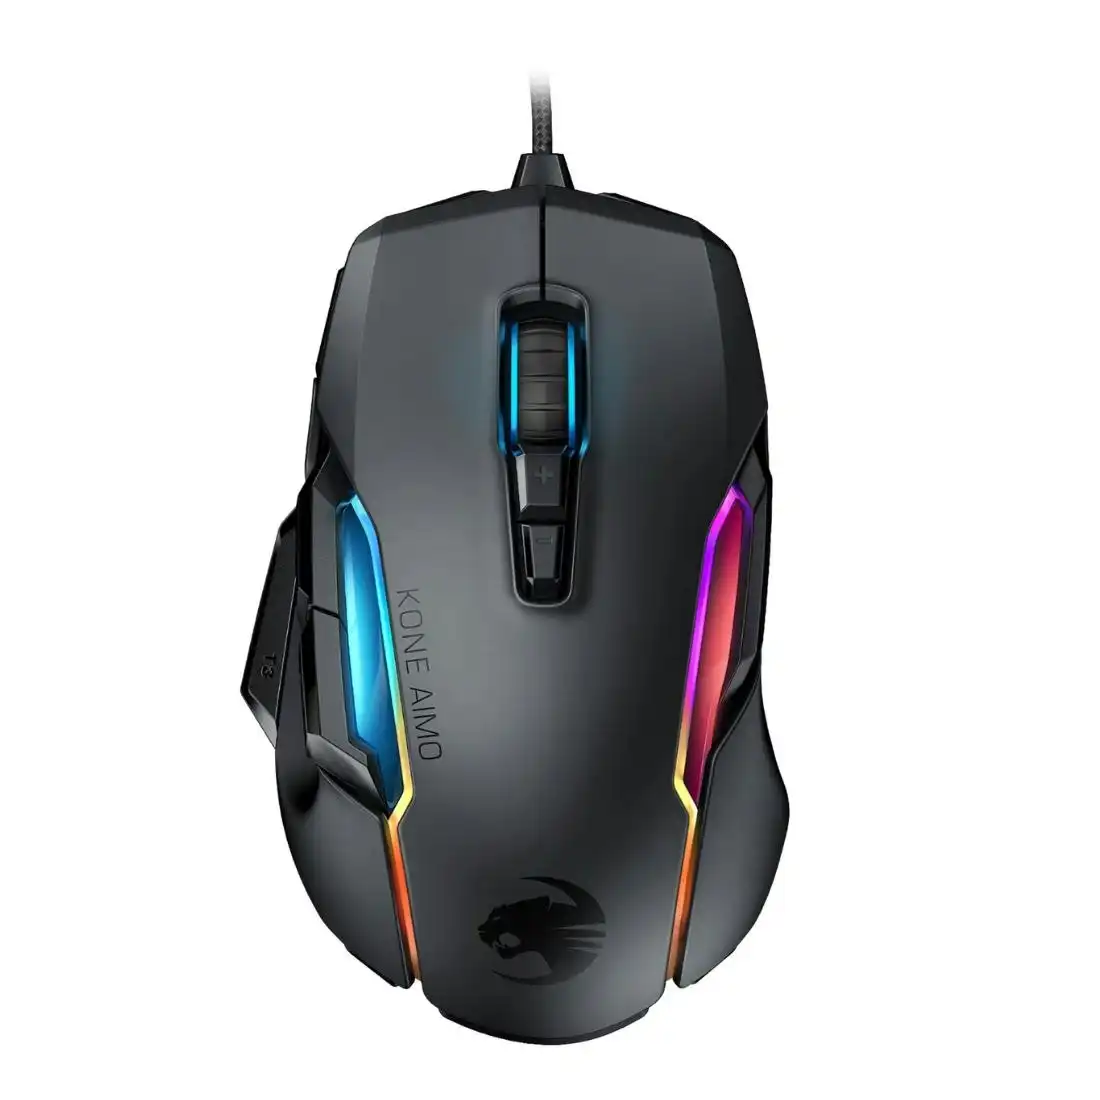 Roccat Kone AIMO RGB Gaming Mouse - Black